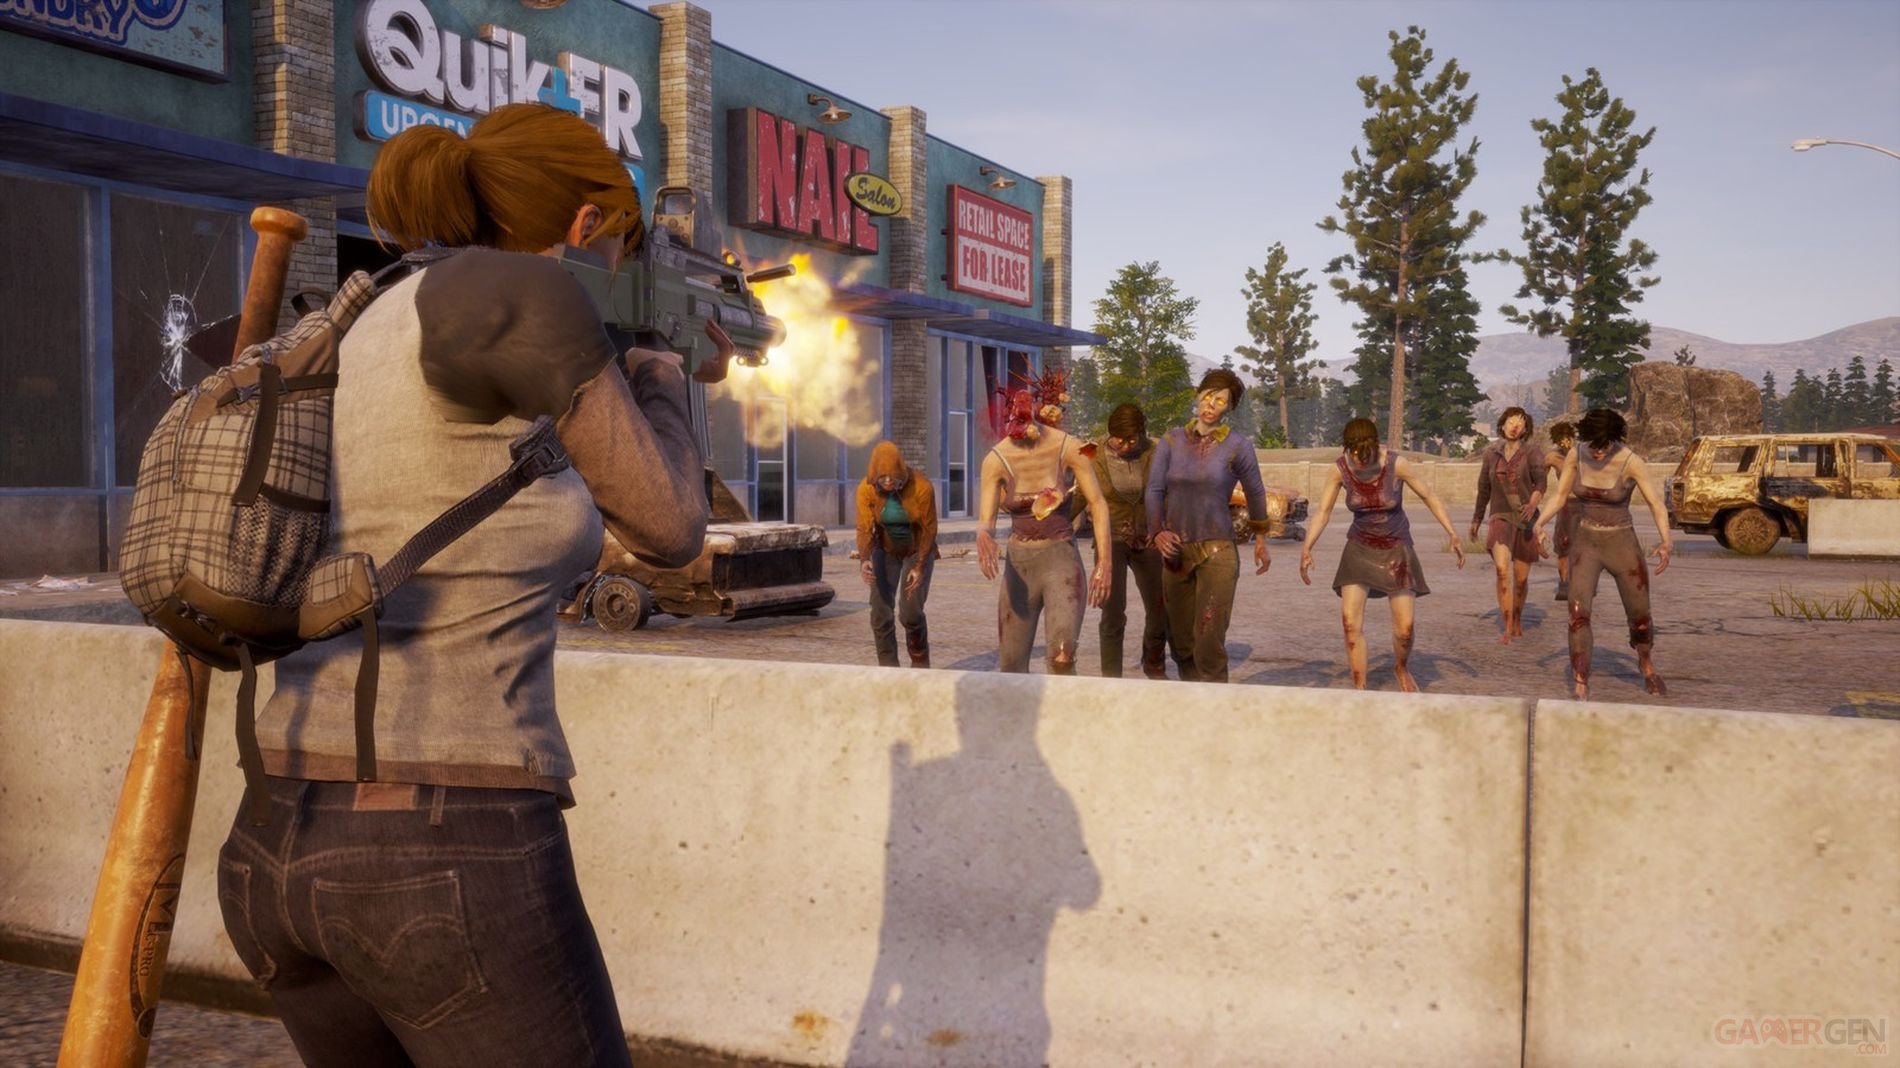 What I Want From State of Decay 3